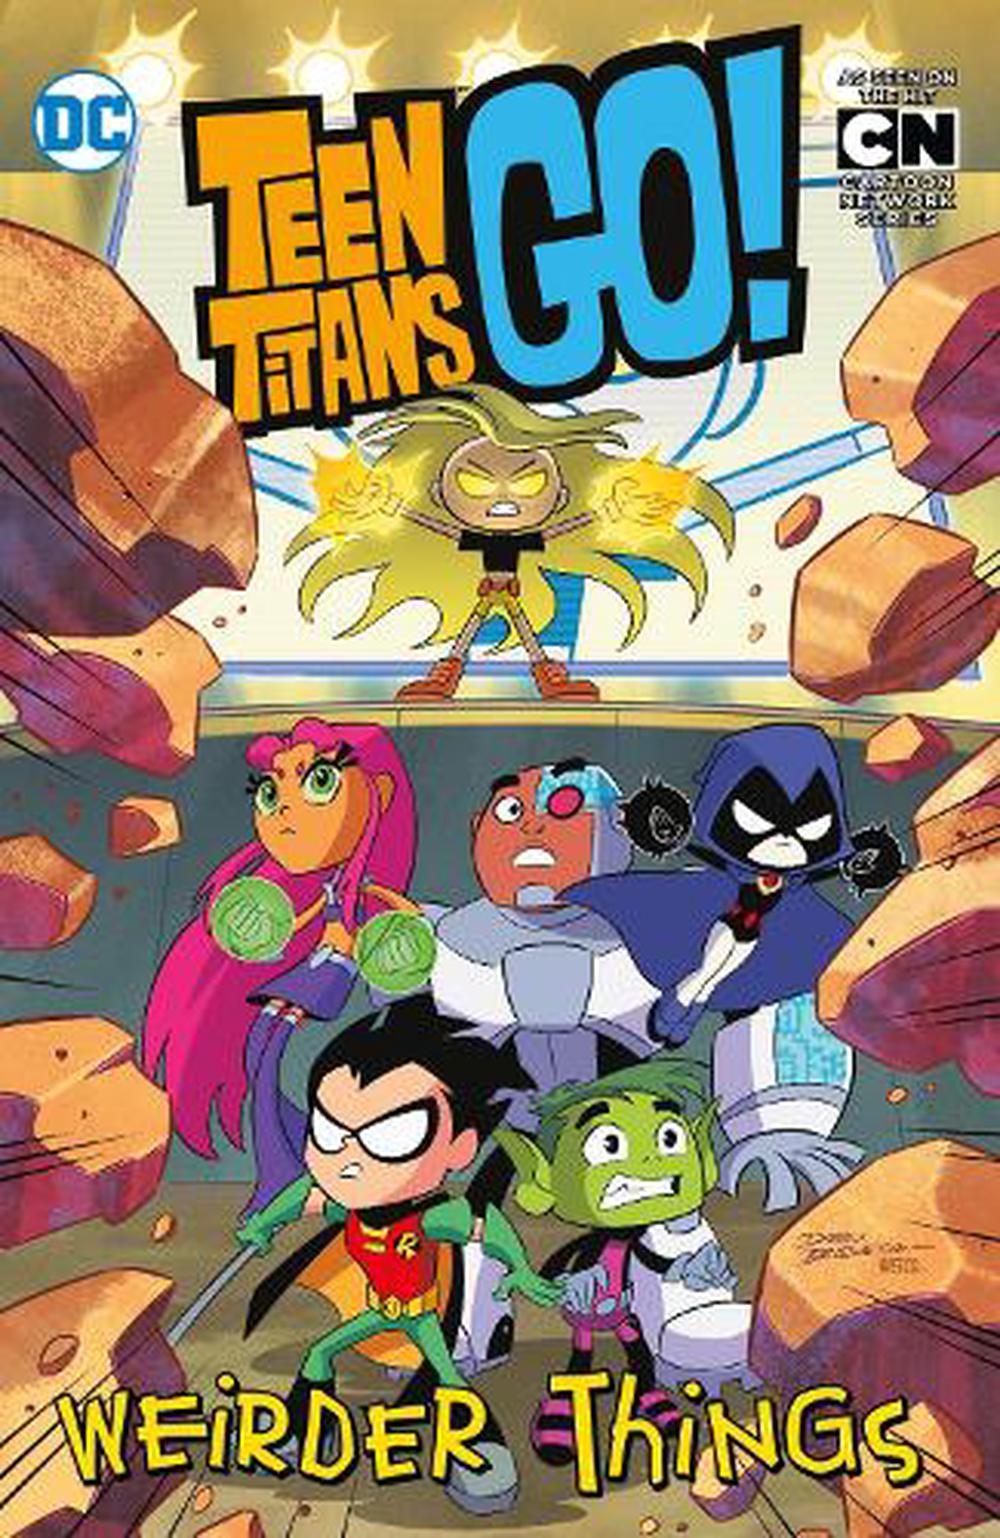 online　Sholly　Paperback,　Teen　9781401294977　Buy　by　The　Titans　Go!　at　Fisch,　Nile